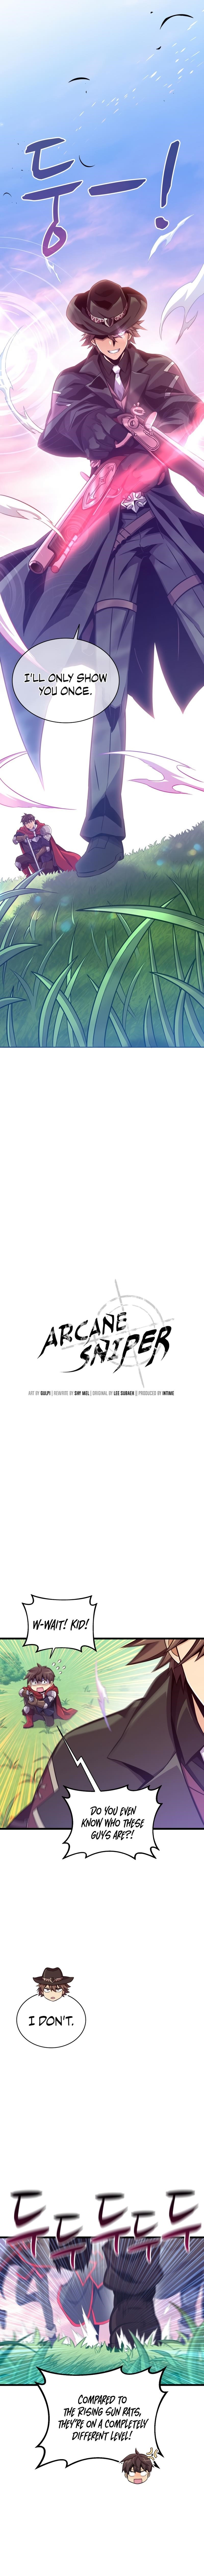 Arcane Sniper, Chapter 91 - English Scans